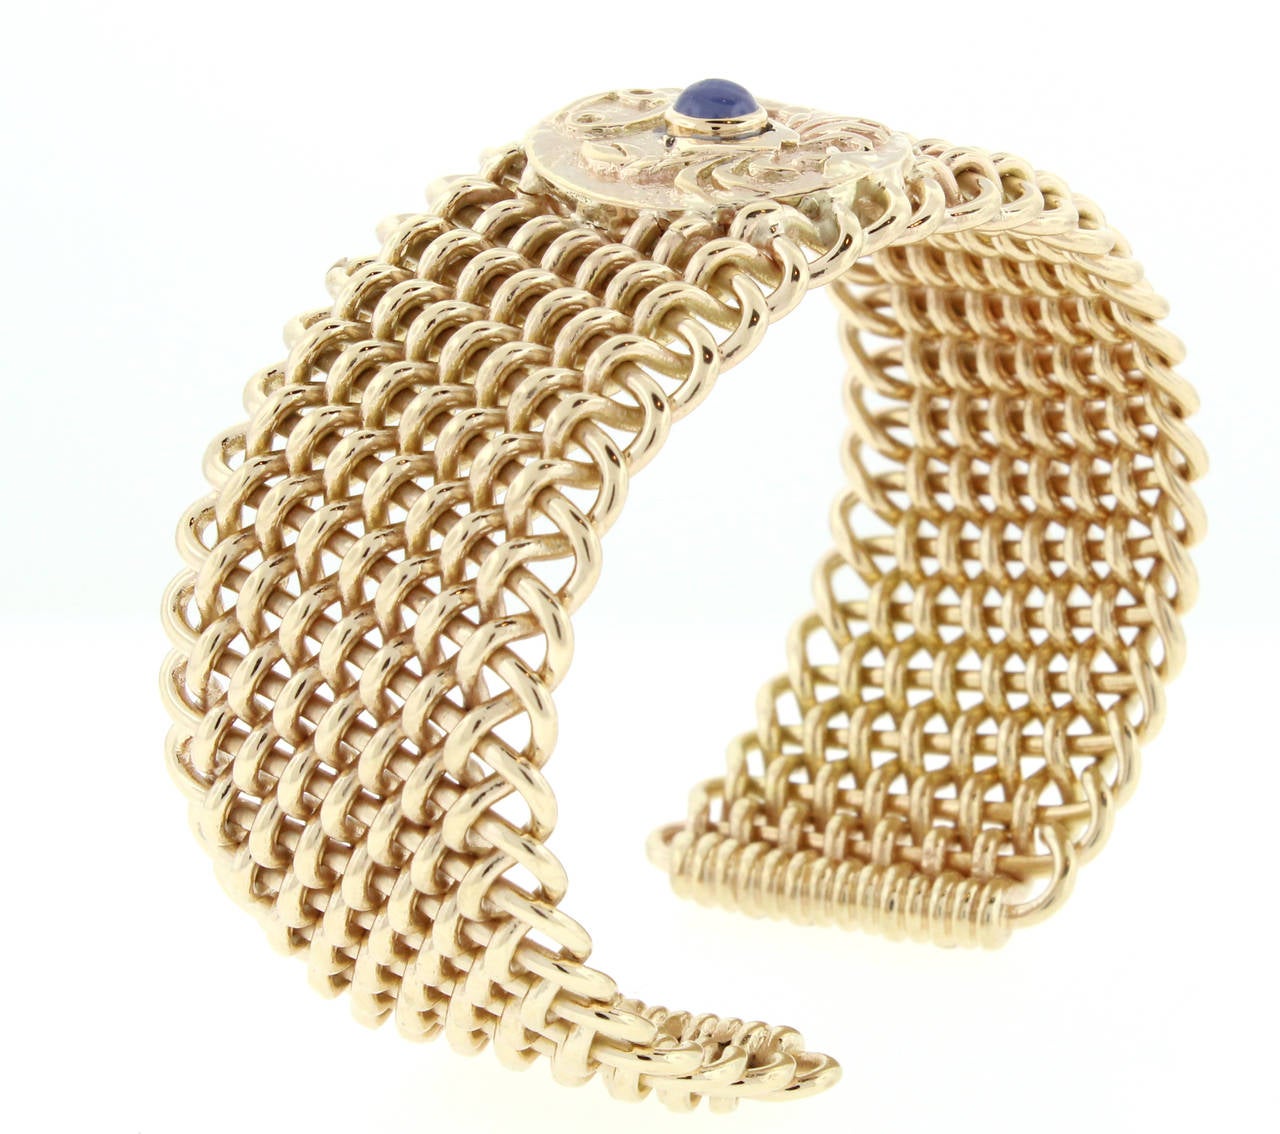 A gift from an admirer, this handmade 14 karat wide cuff bracelet was a prized possession of one of the golden age of Broadway's leading ladies.

Iva Withers, an actress and singer, was known for her long runs in some of Rodgers and Hammerstein's